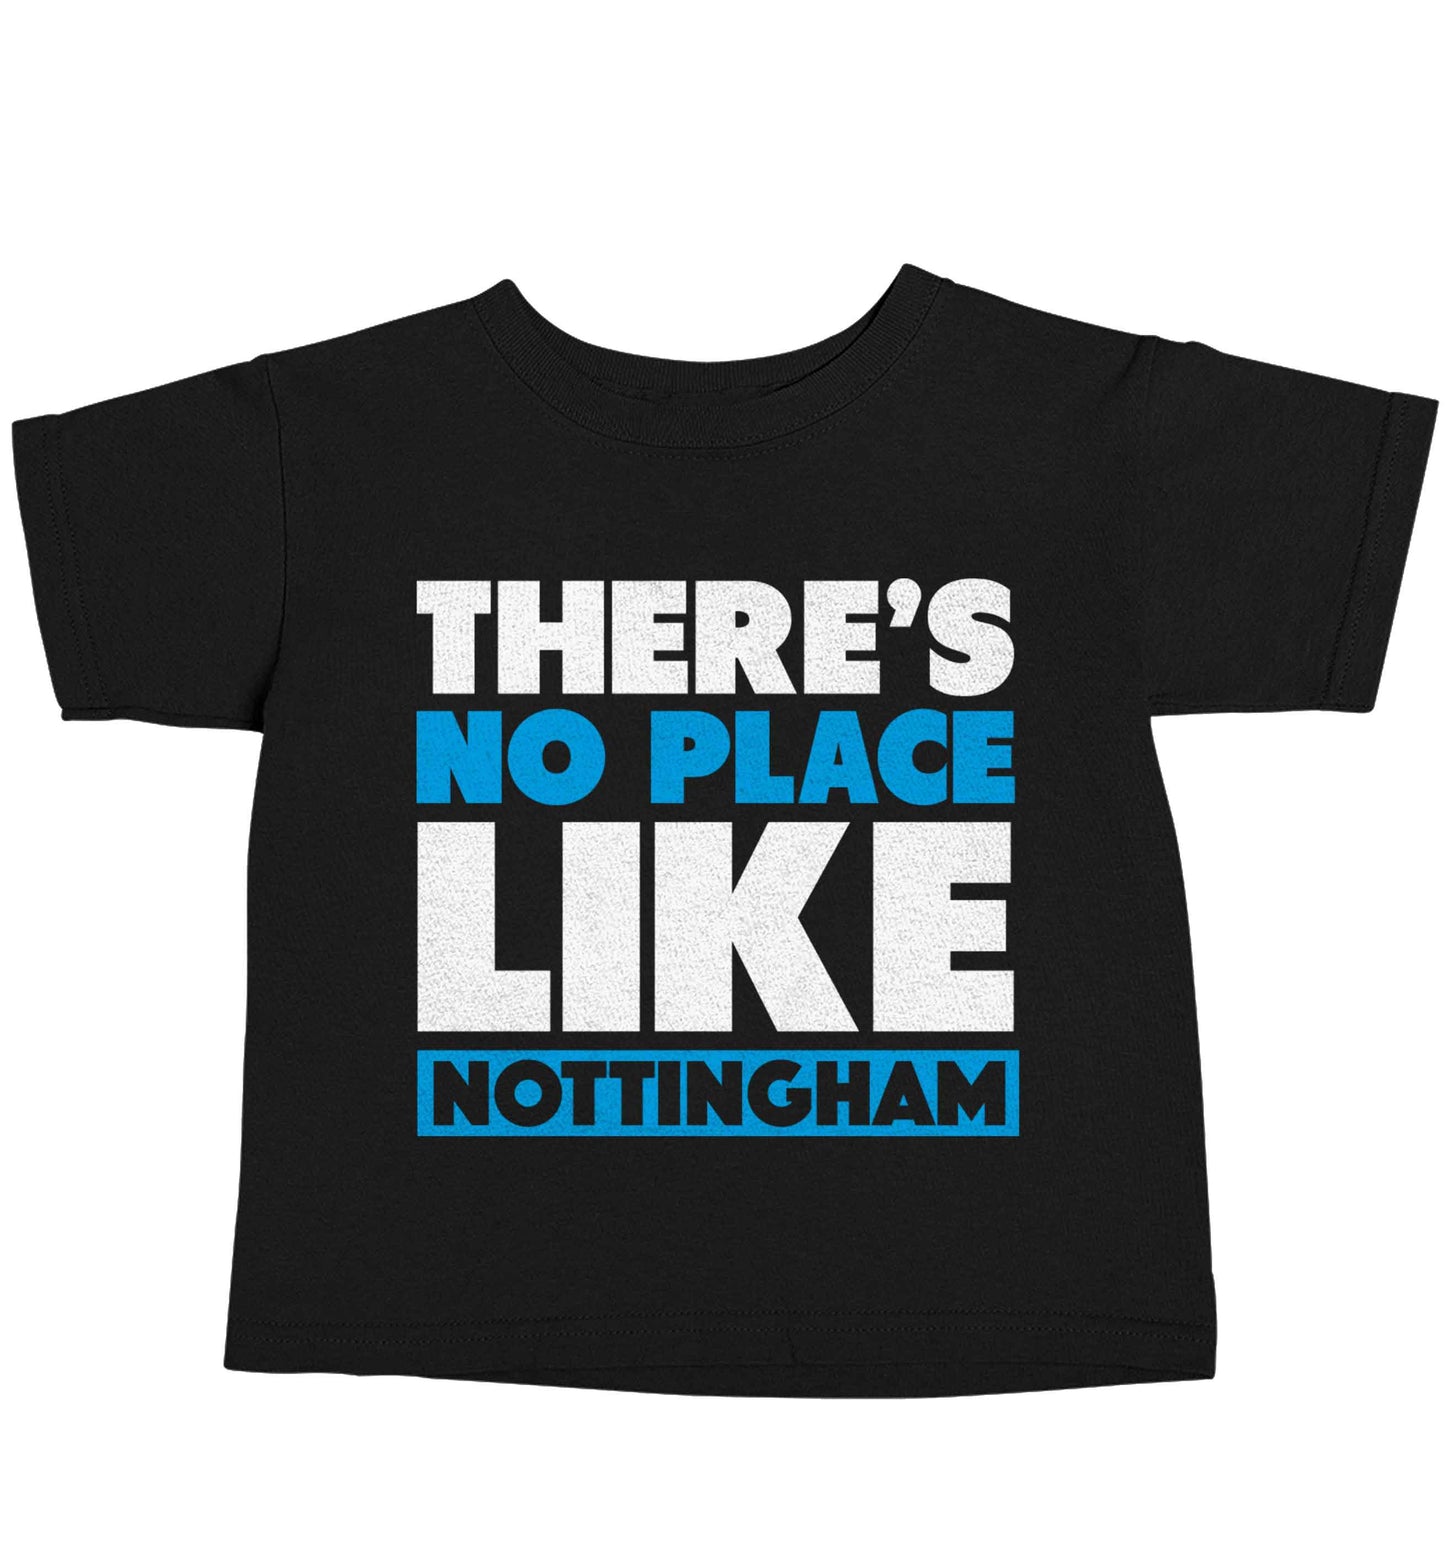 There's no place like Nottingham Black baby toddler Tshirt 2 years